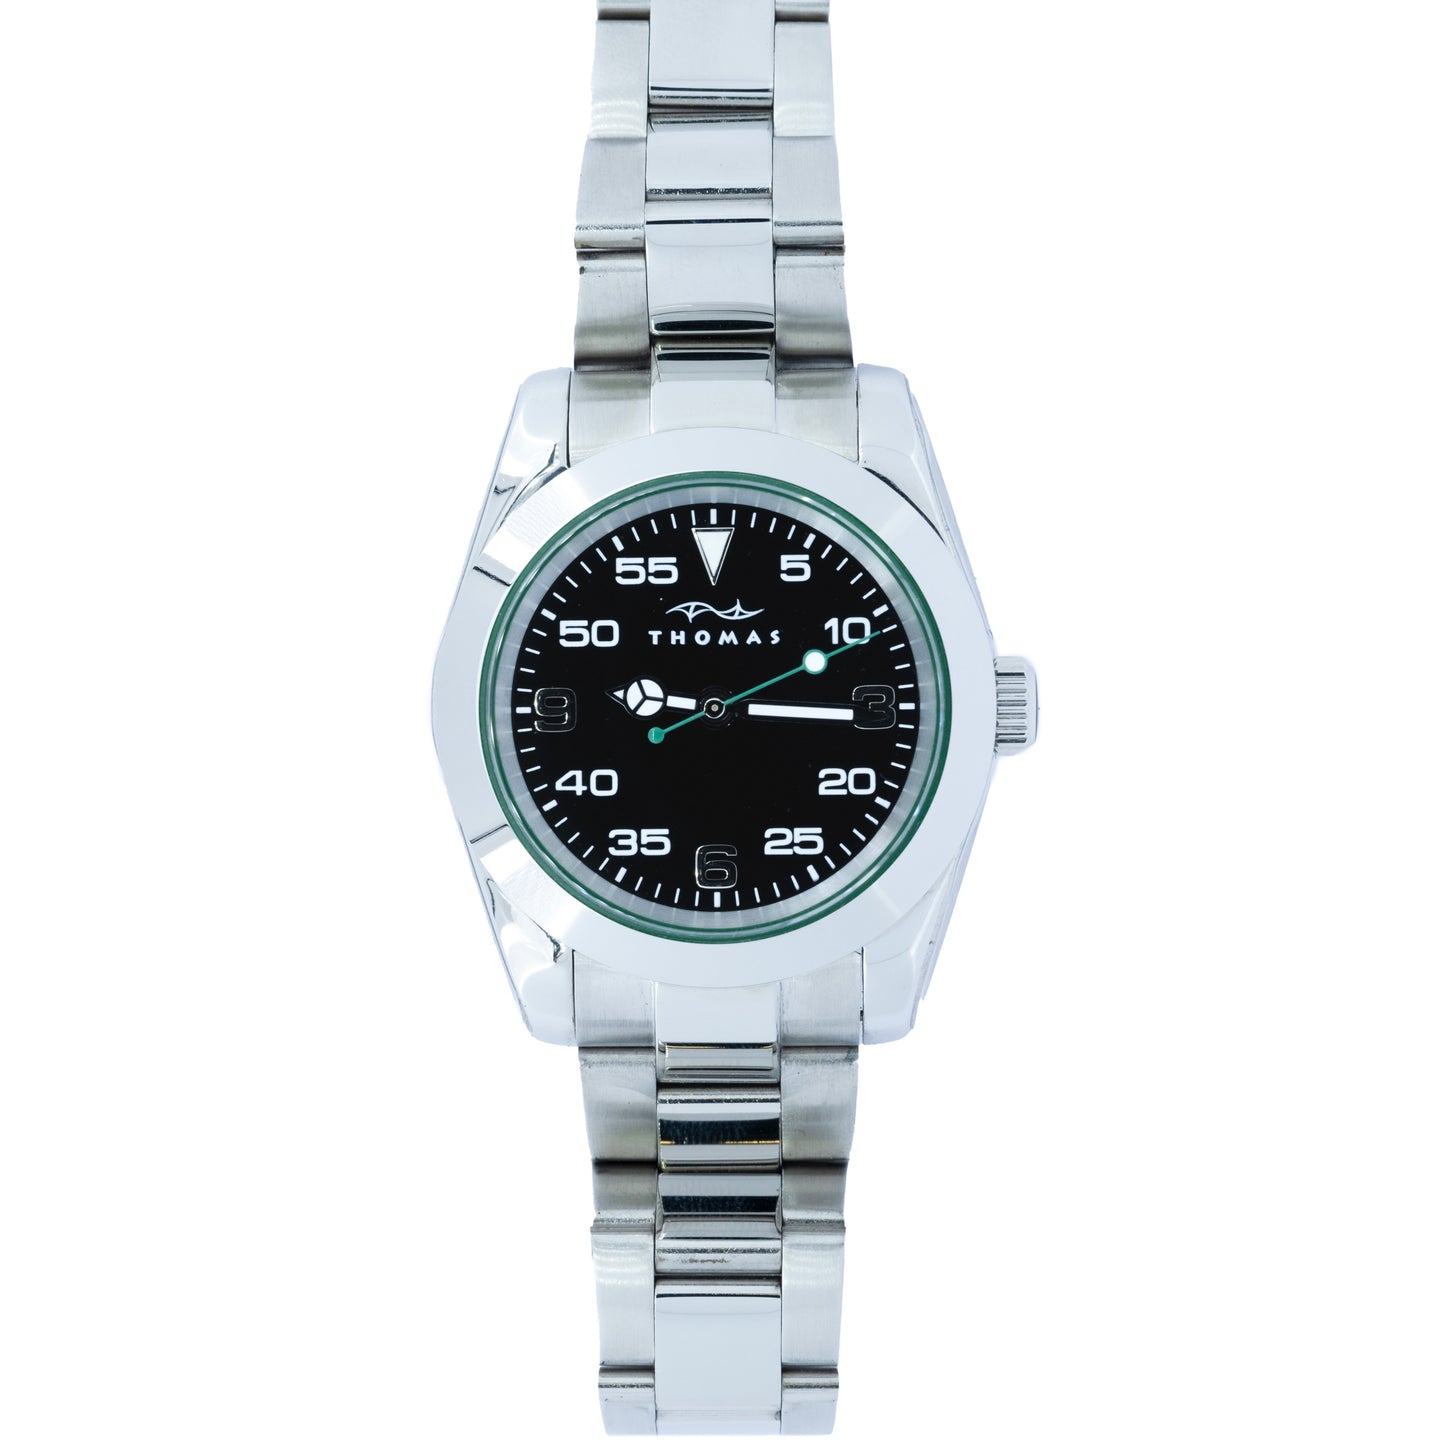 Thomas Classic 40mm Silver Automatic Watch